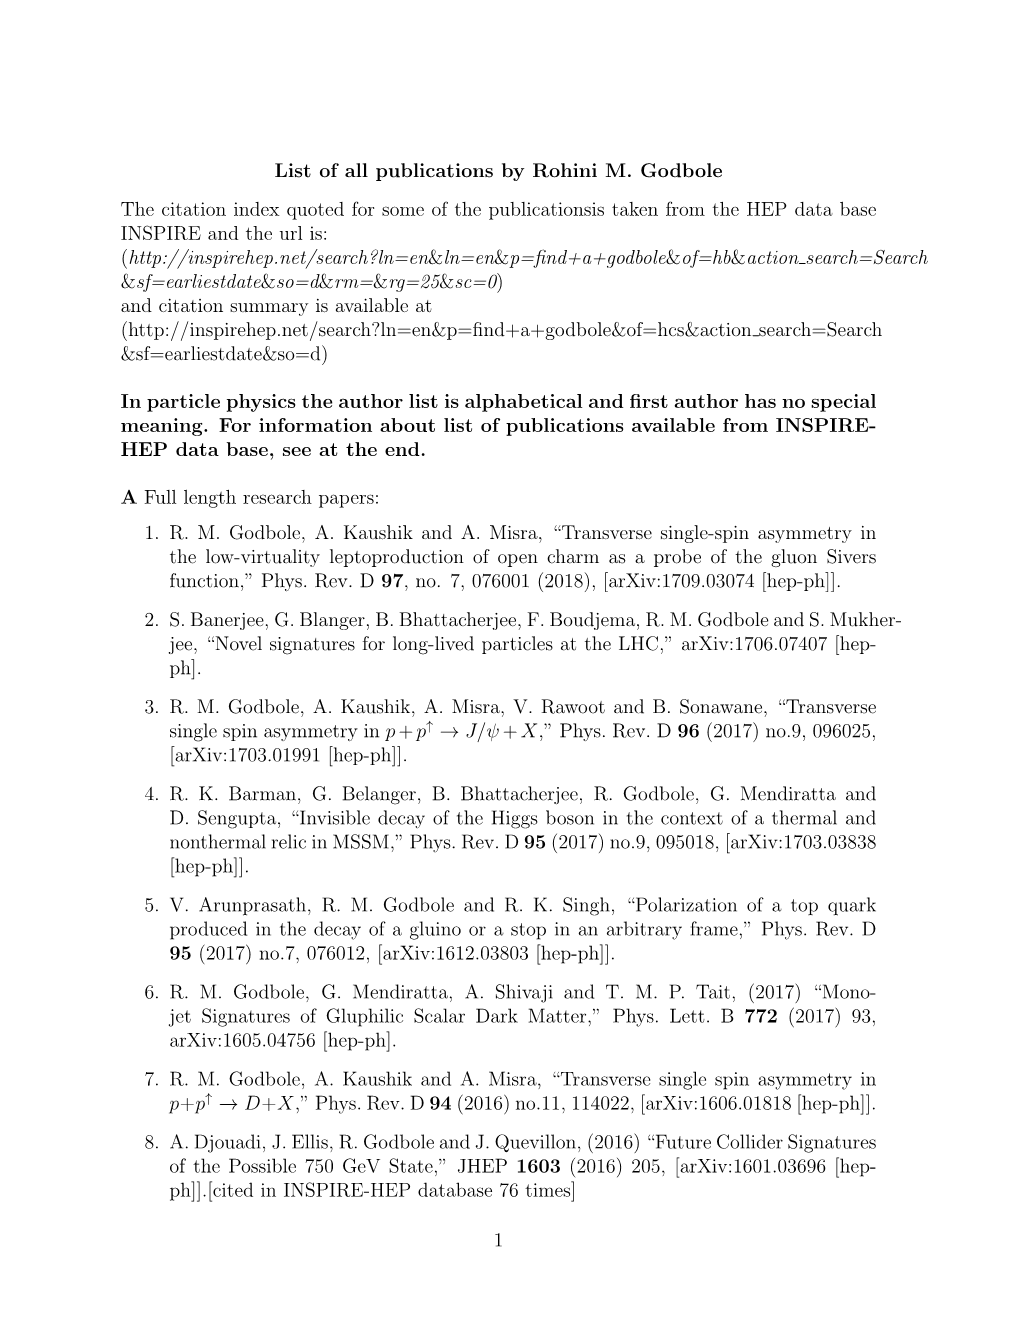 List of All Publications by Rohini M. Godbole the Citation Index Quoted